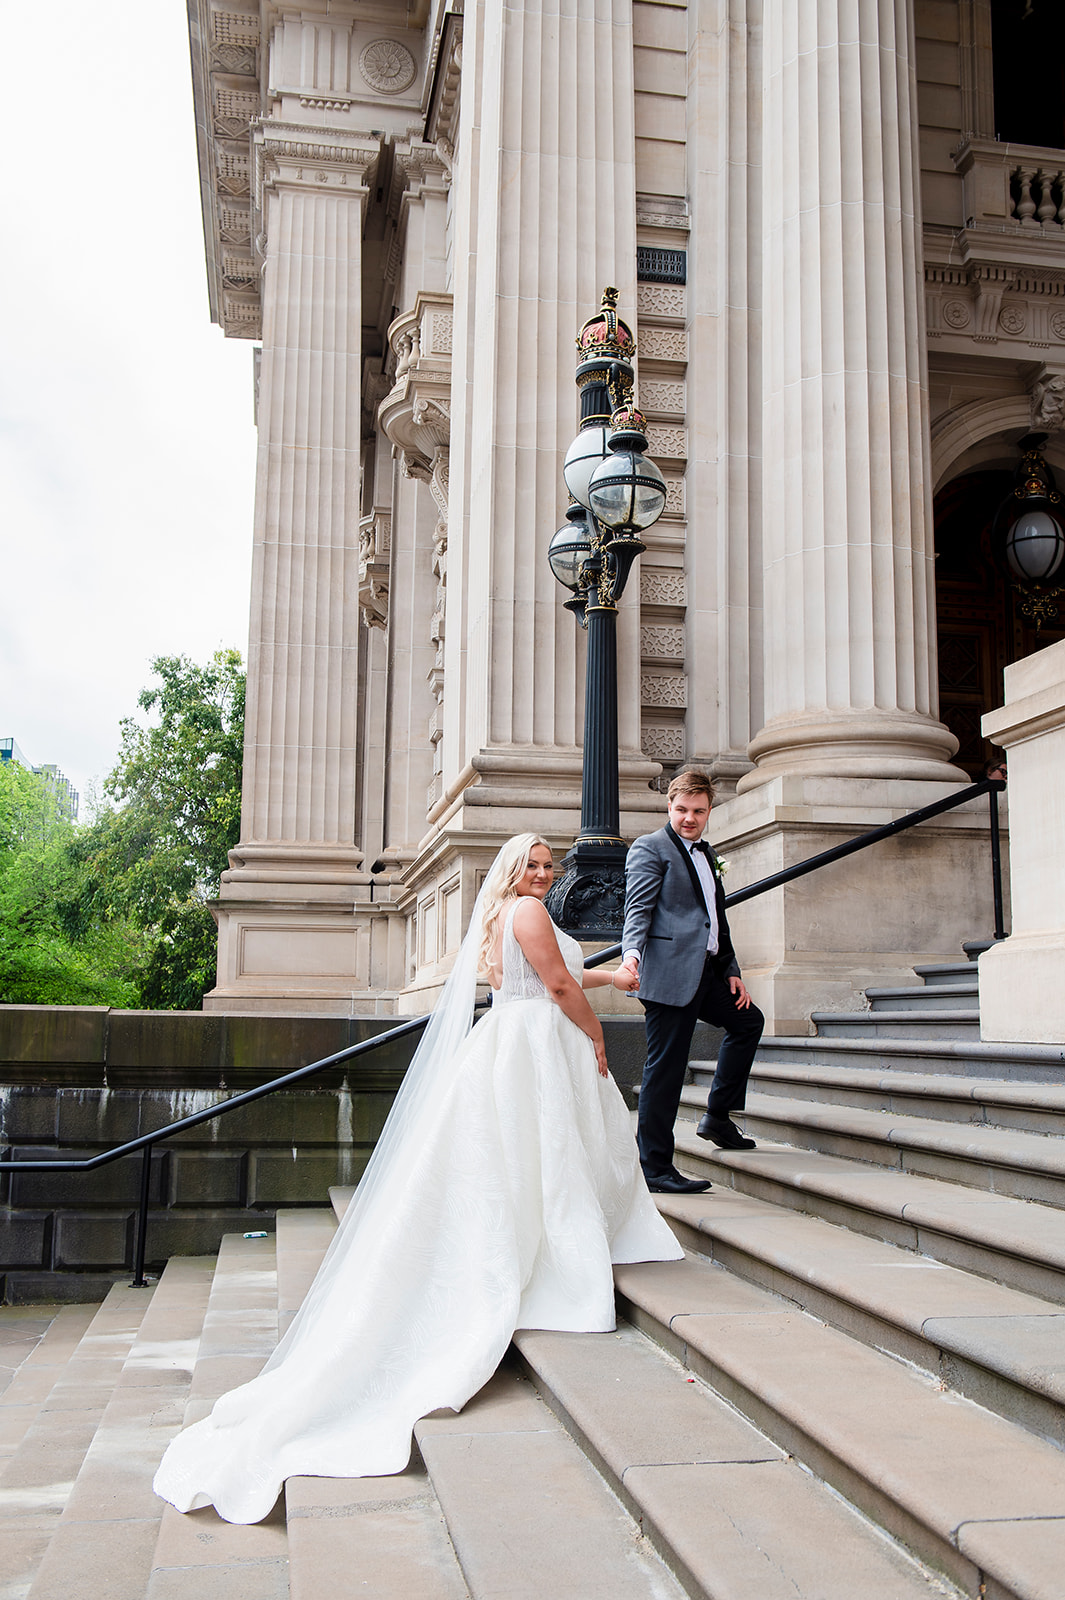 Wedding photo at Parliament steps in Melbourne